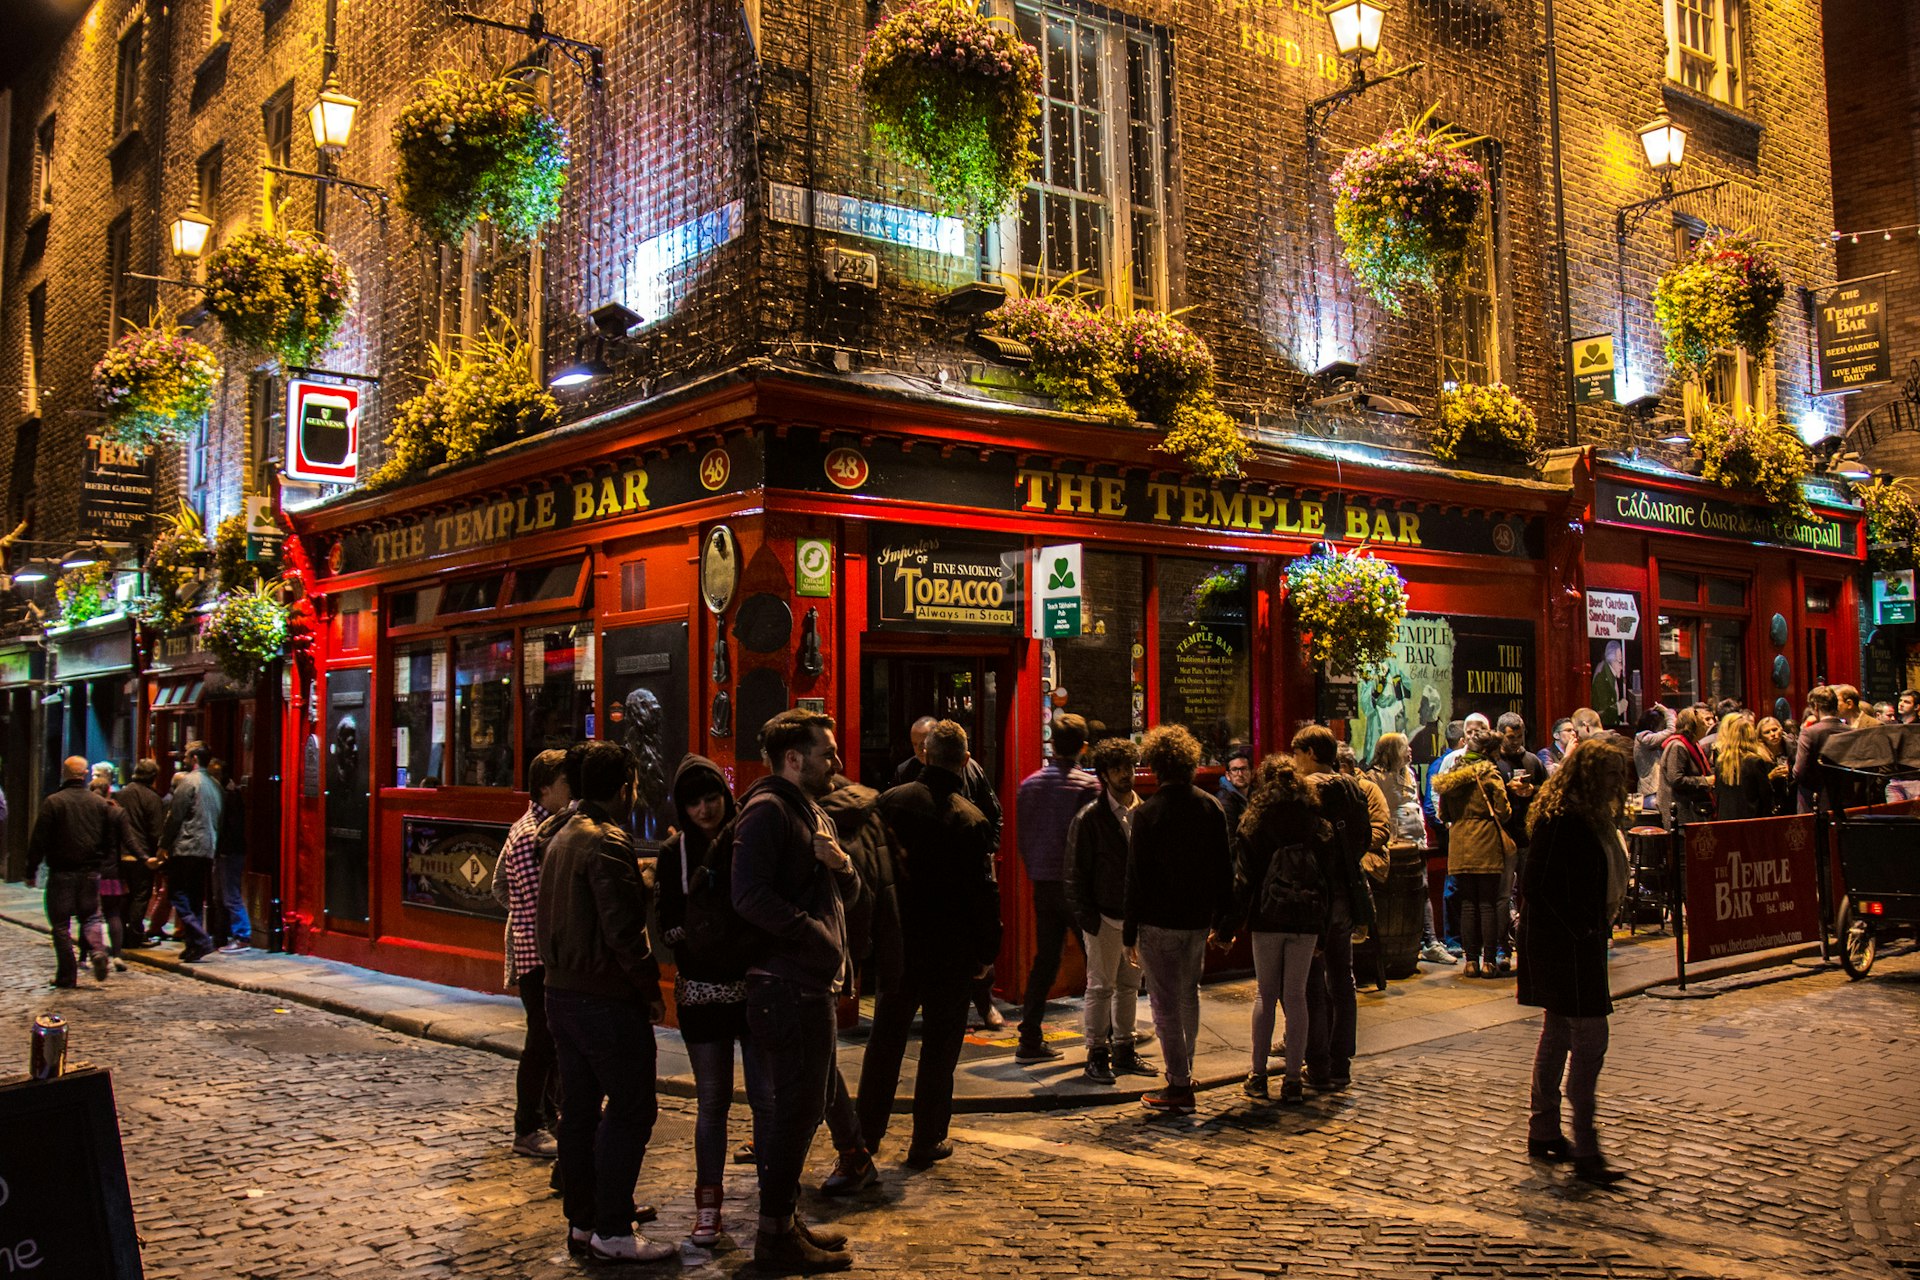 A group of drinkers stand outside The Temple Bar pub in the Temple Bar area of Dublin at night